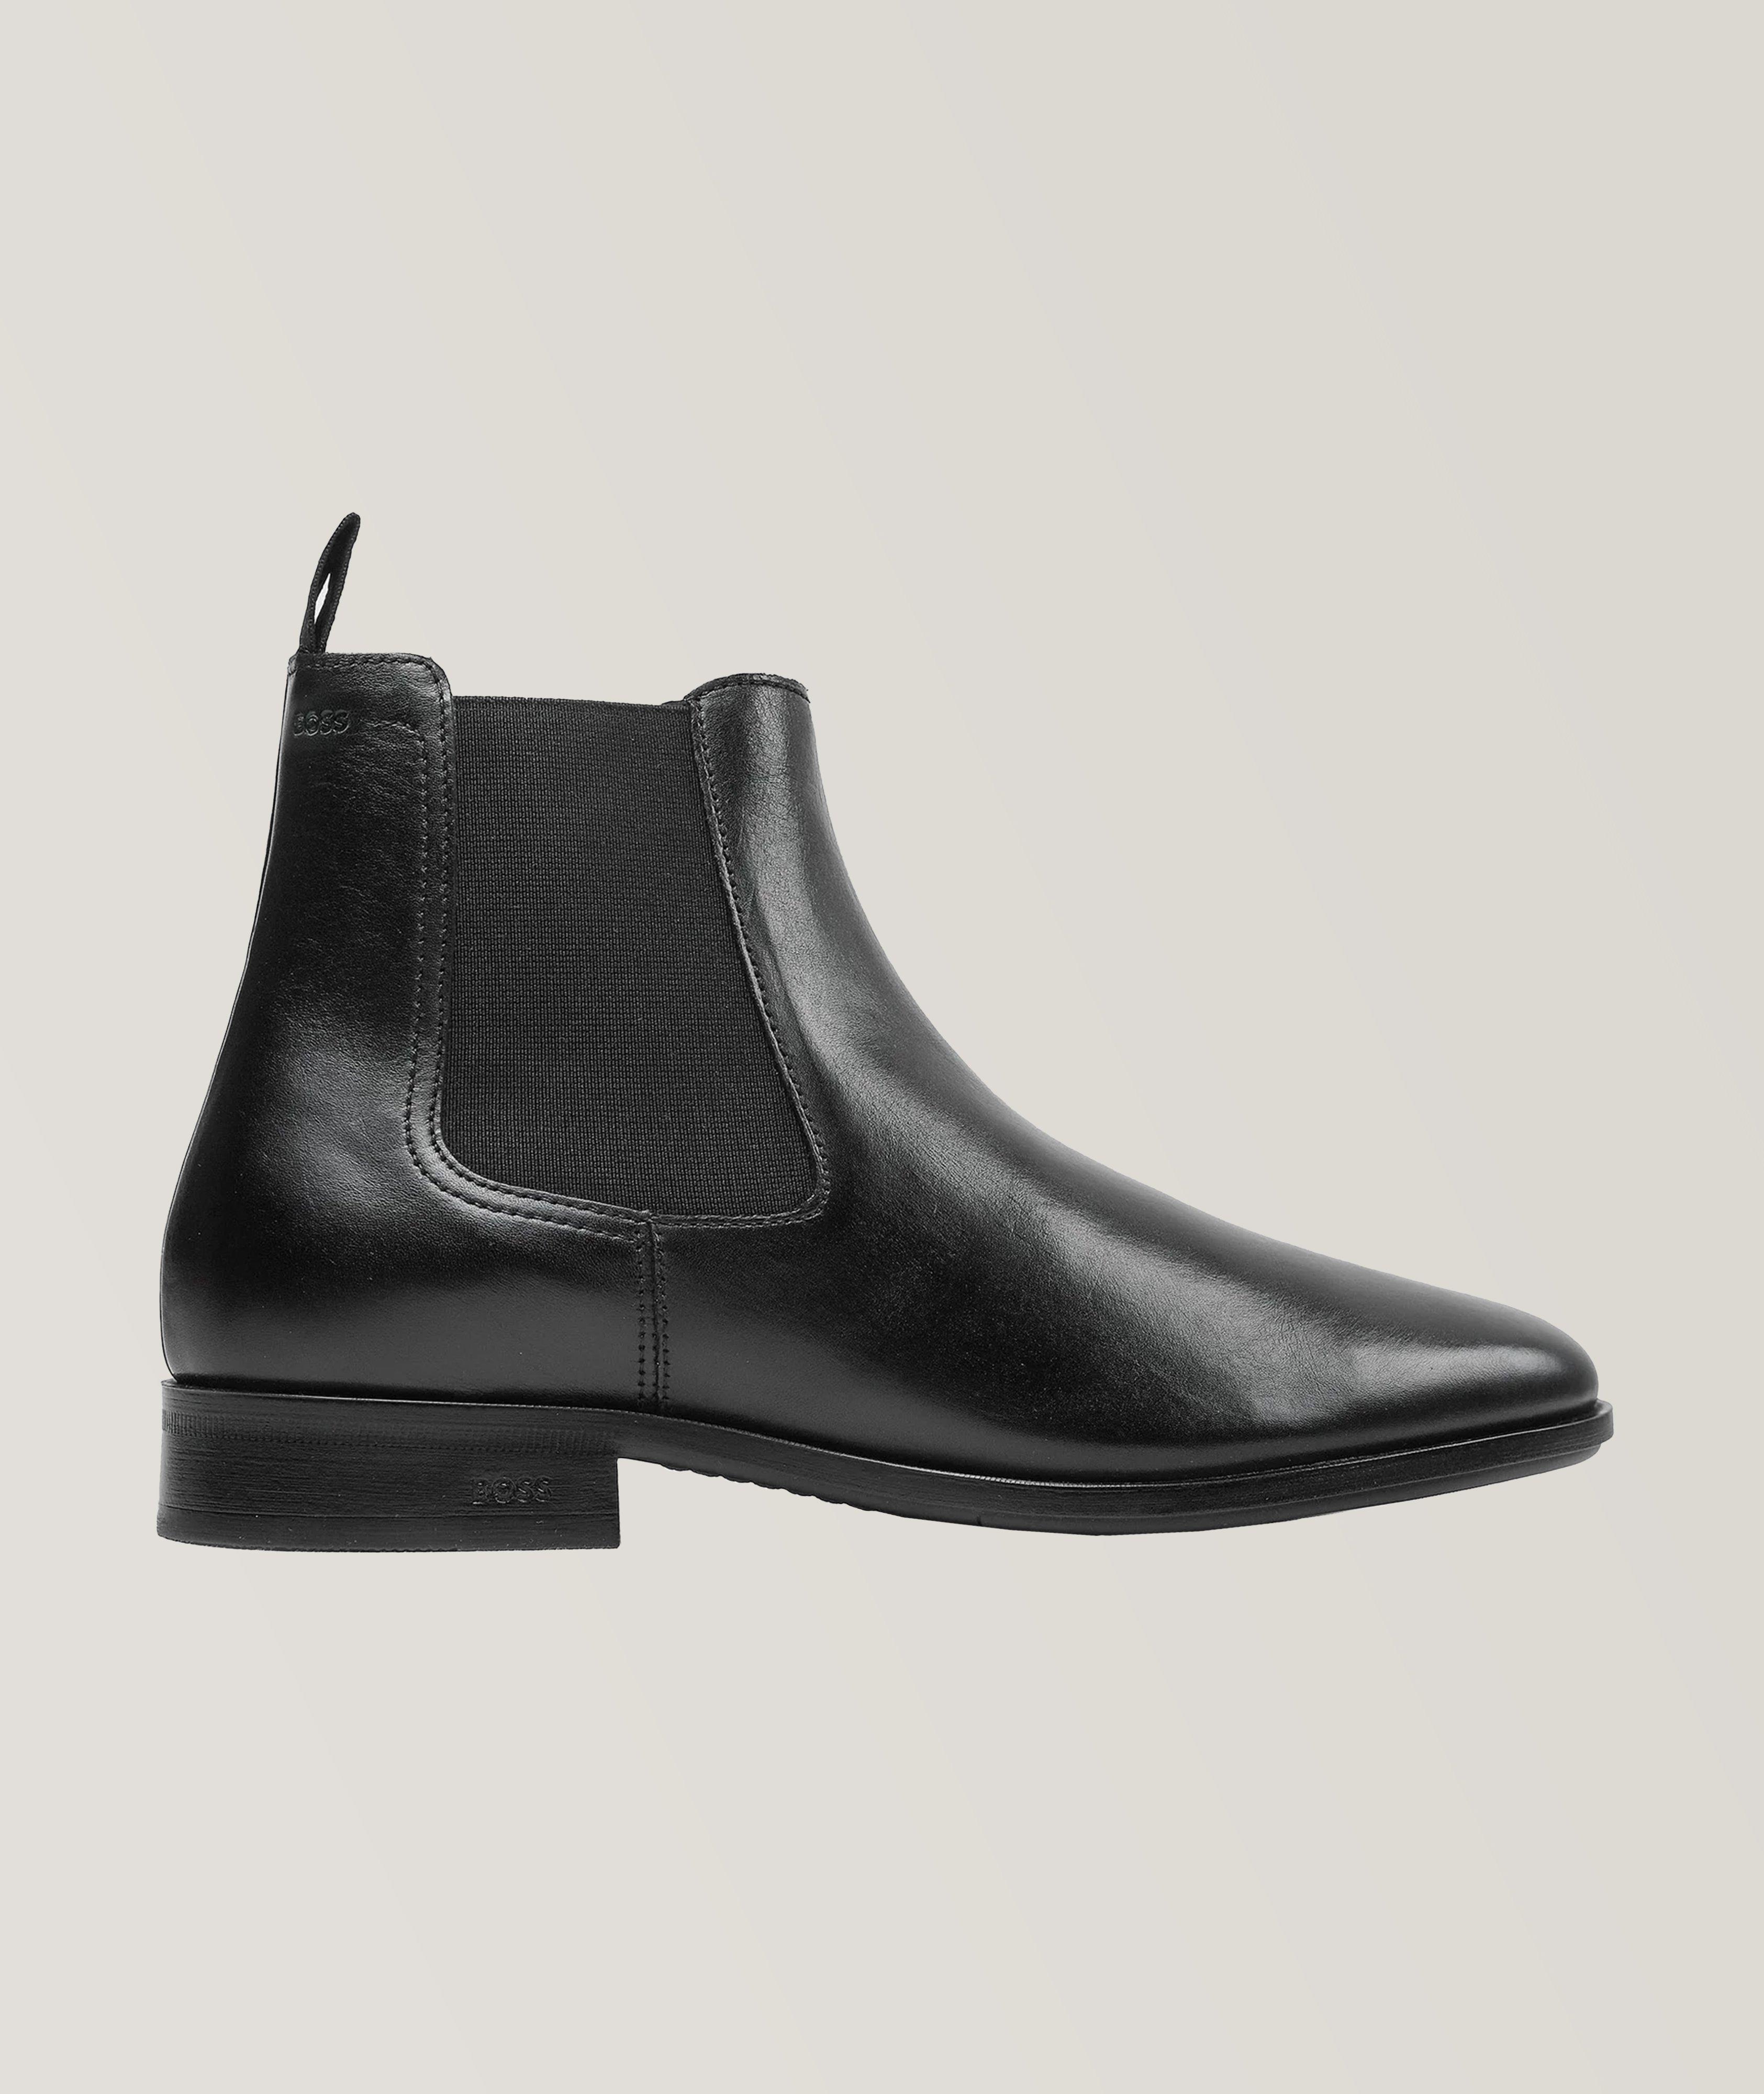 Colby Leather Chelsea Boots image 0